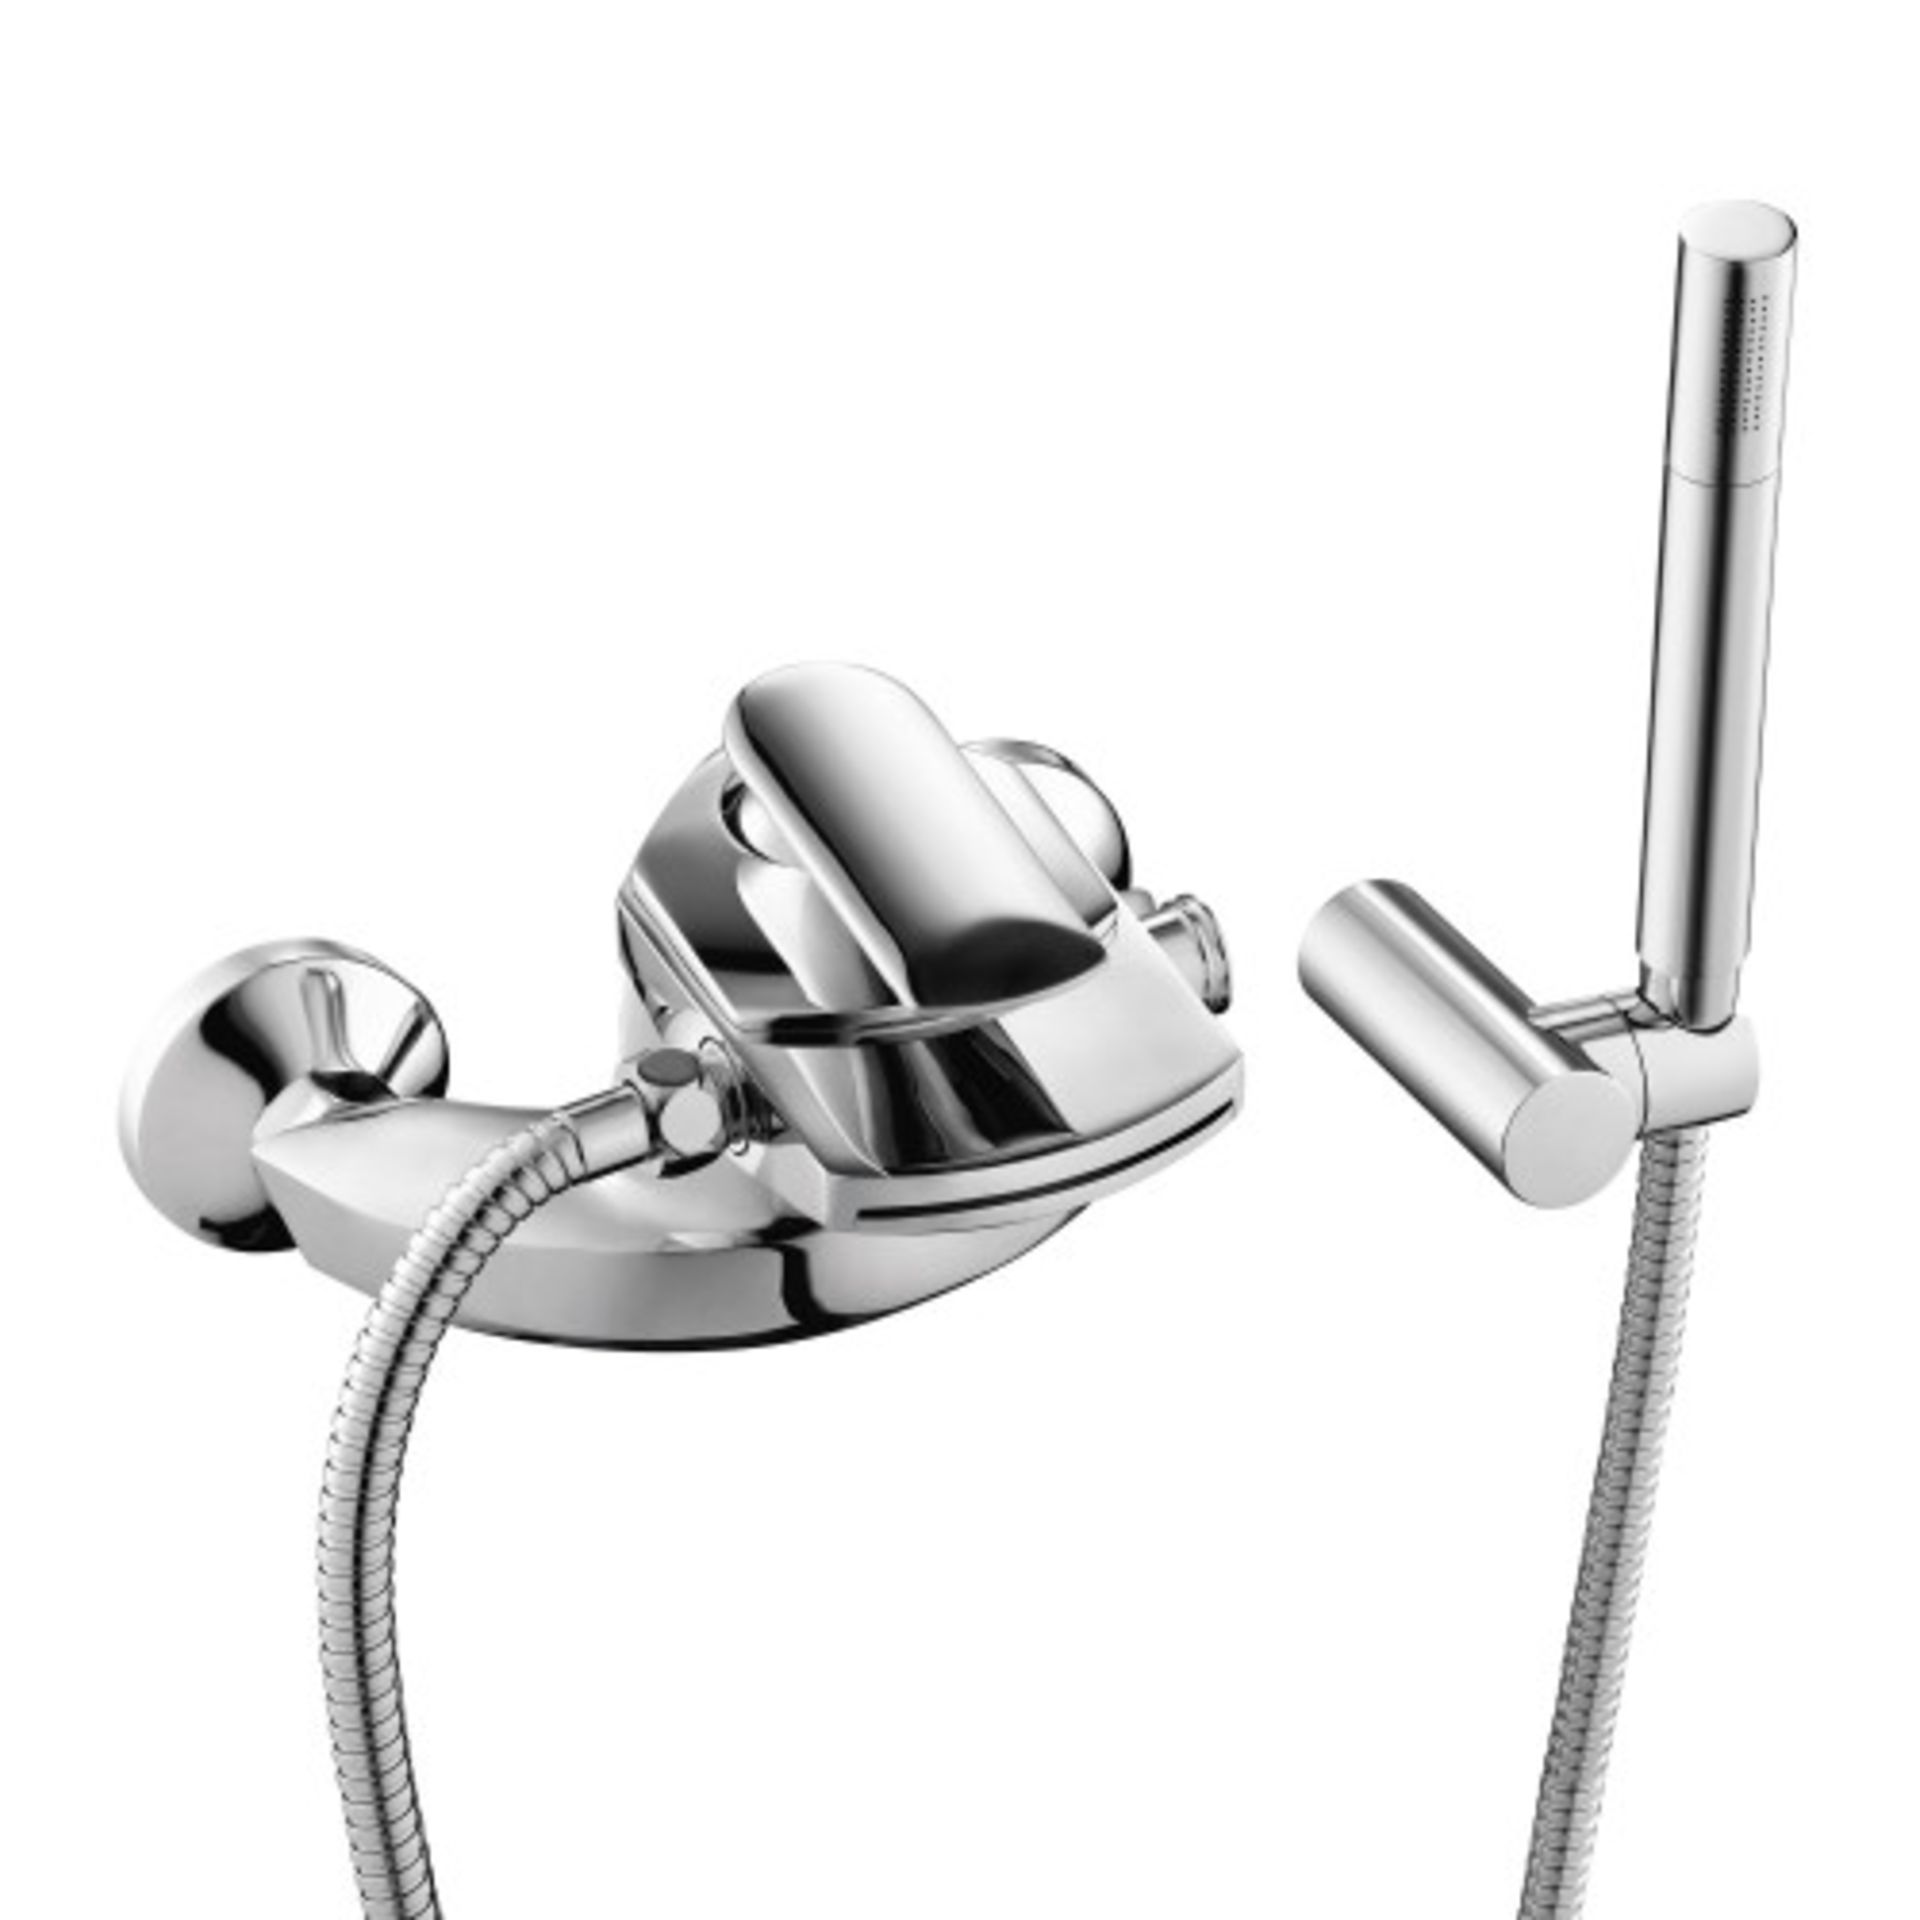 (CE99) OSHI WATERFALL BATH TAP WITH HAND HELD SHOWER HEAD. Stylish new Generation Waterfall Tap... - Image 3 of 3